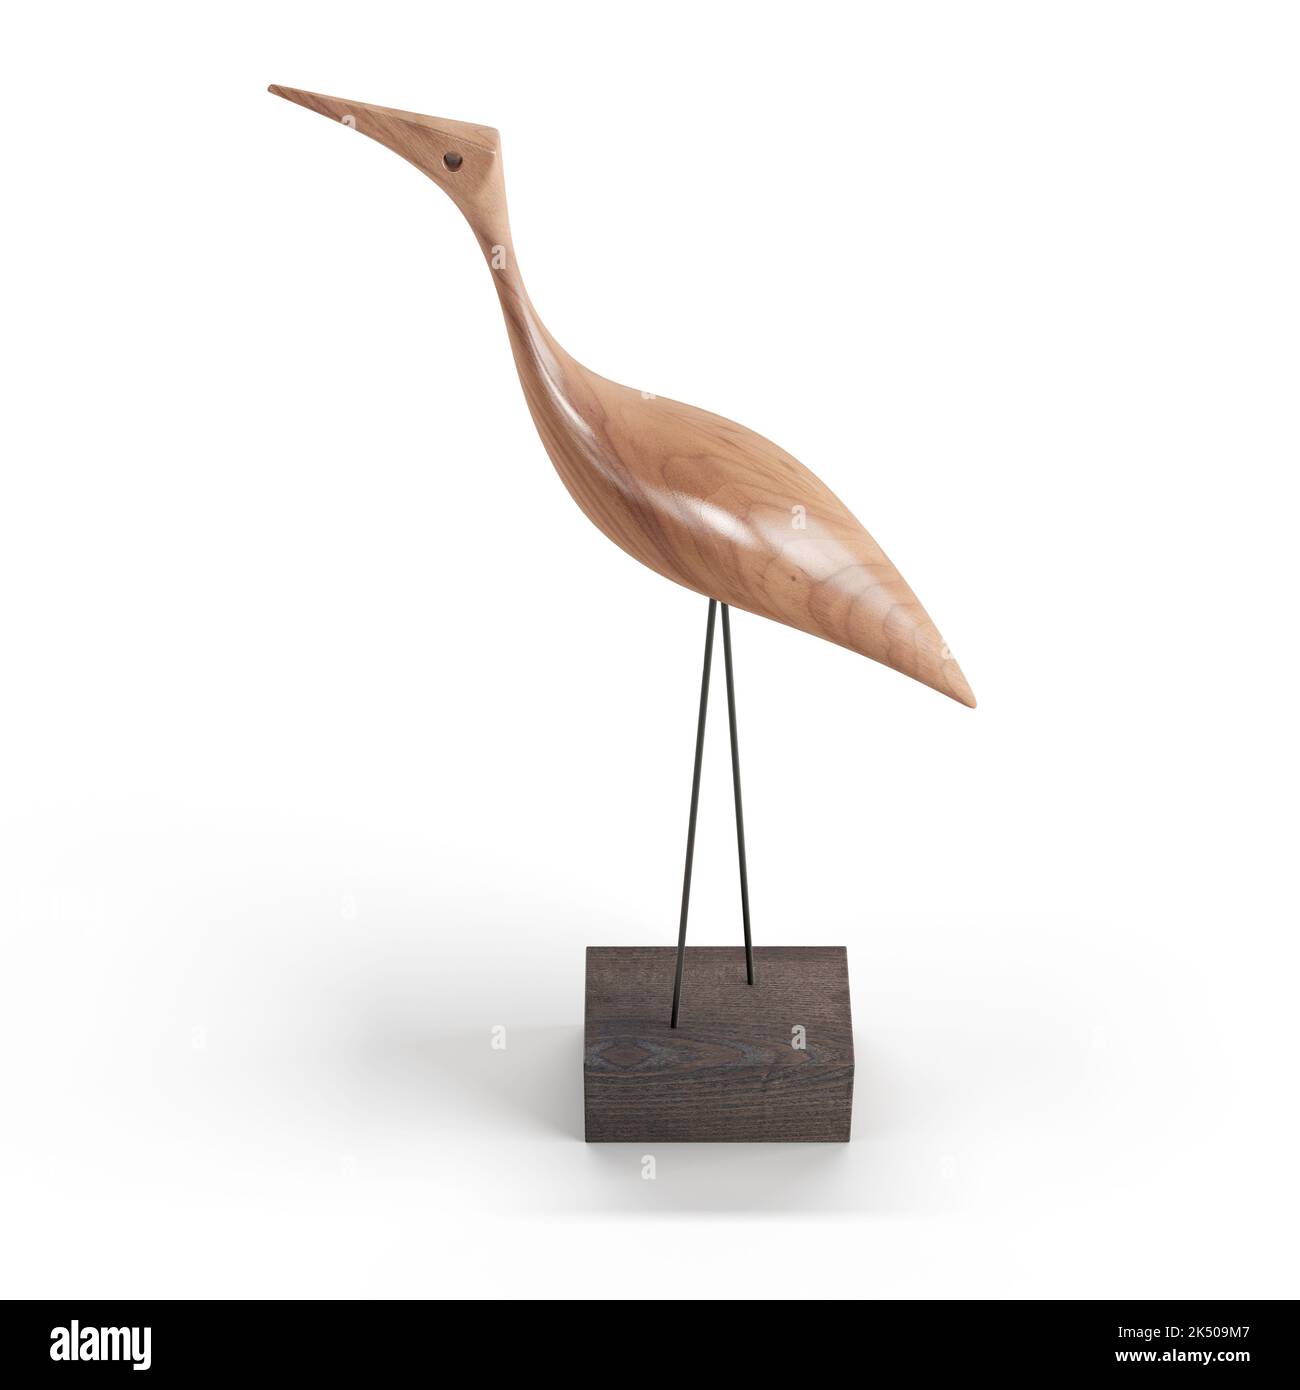 3d rendering of a reflective bird with long legs Illustration #131932160